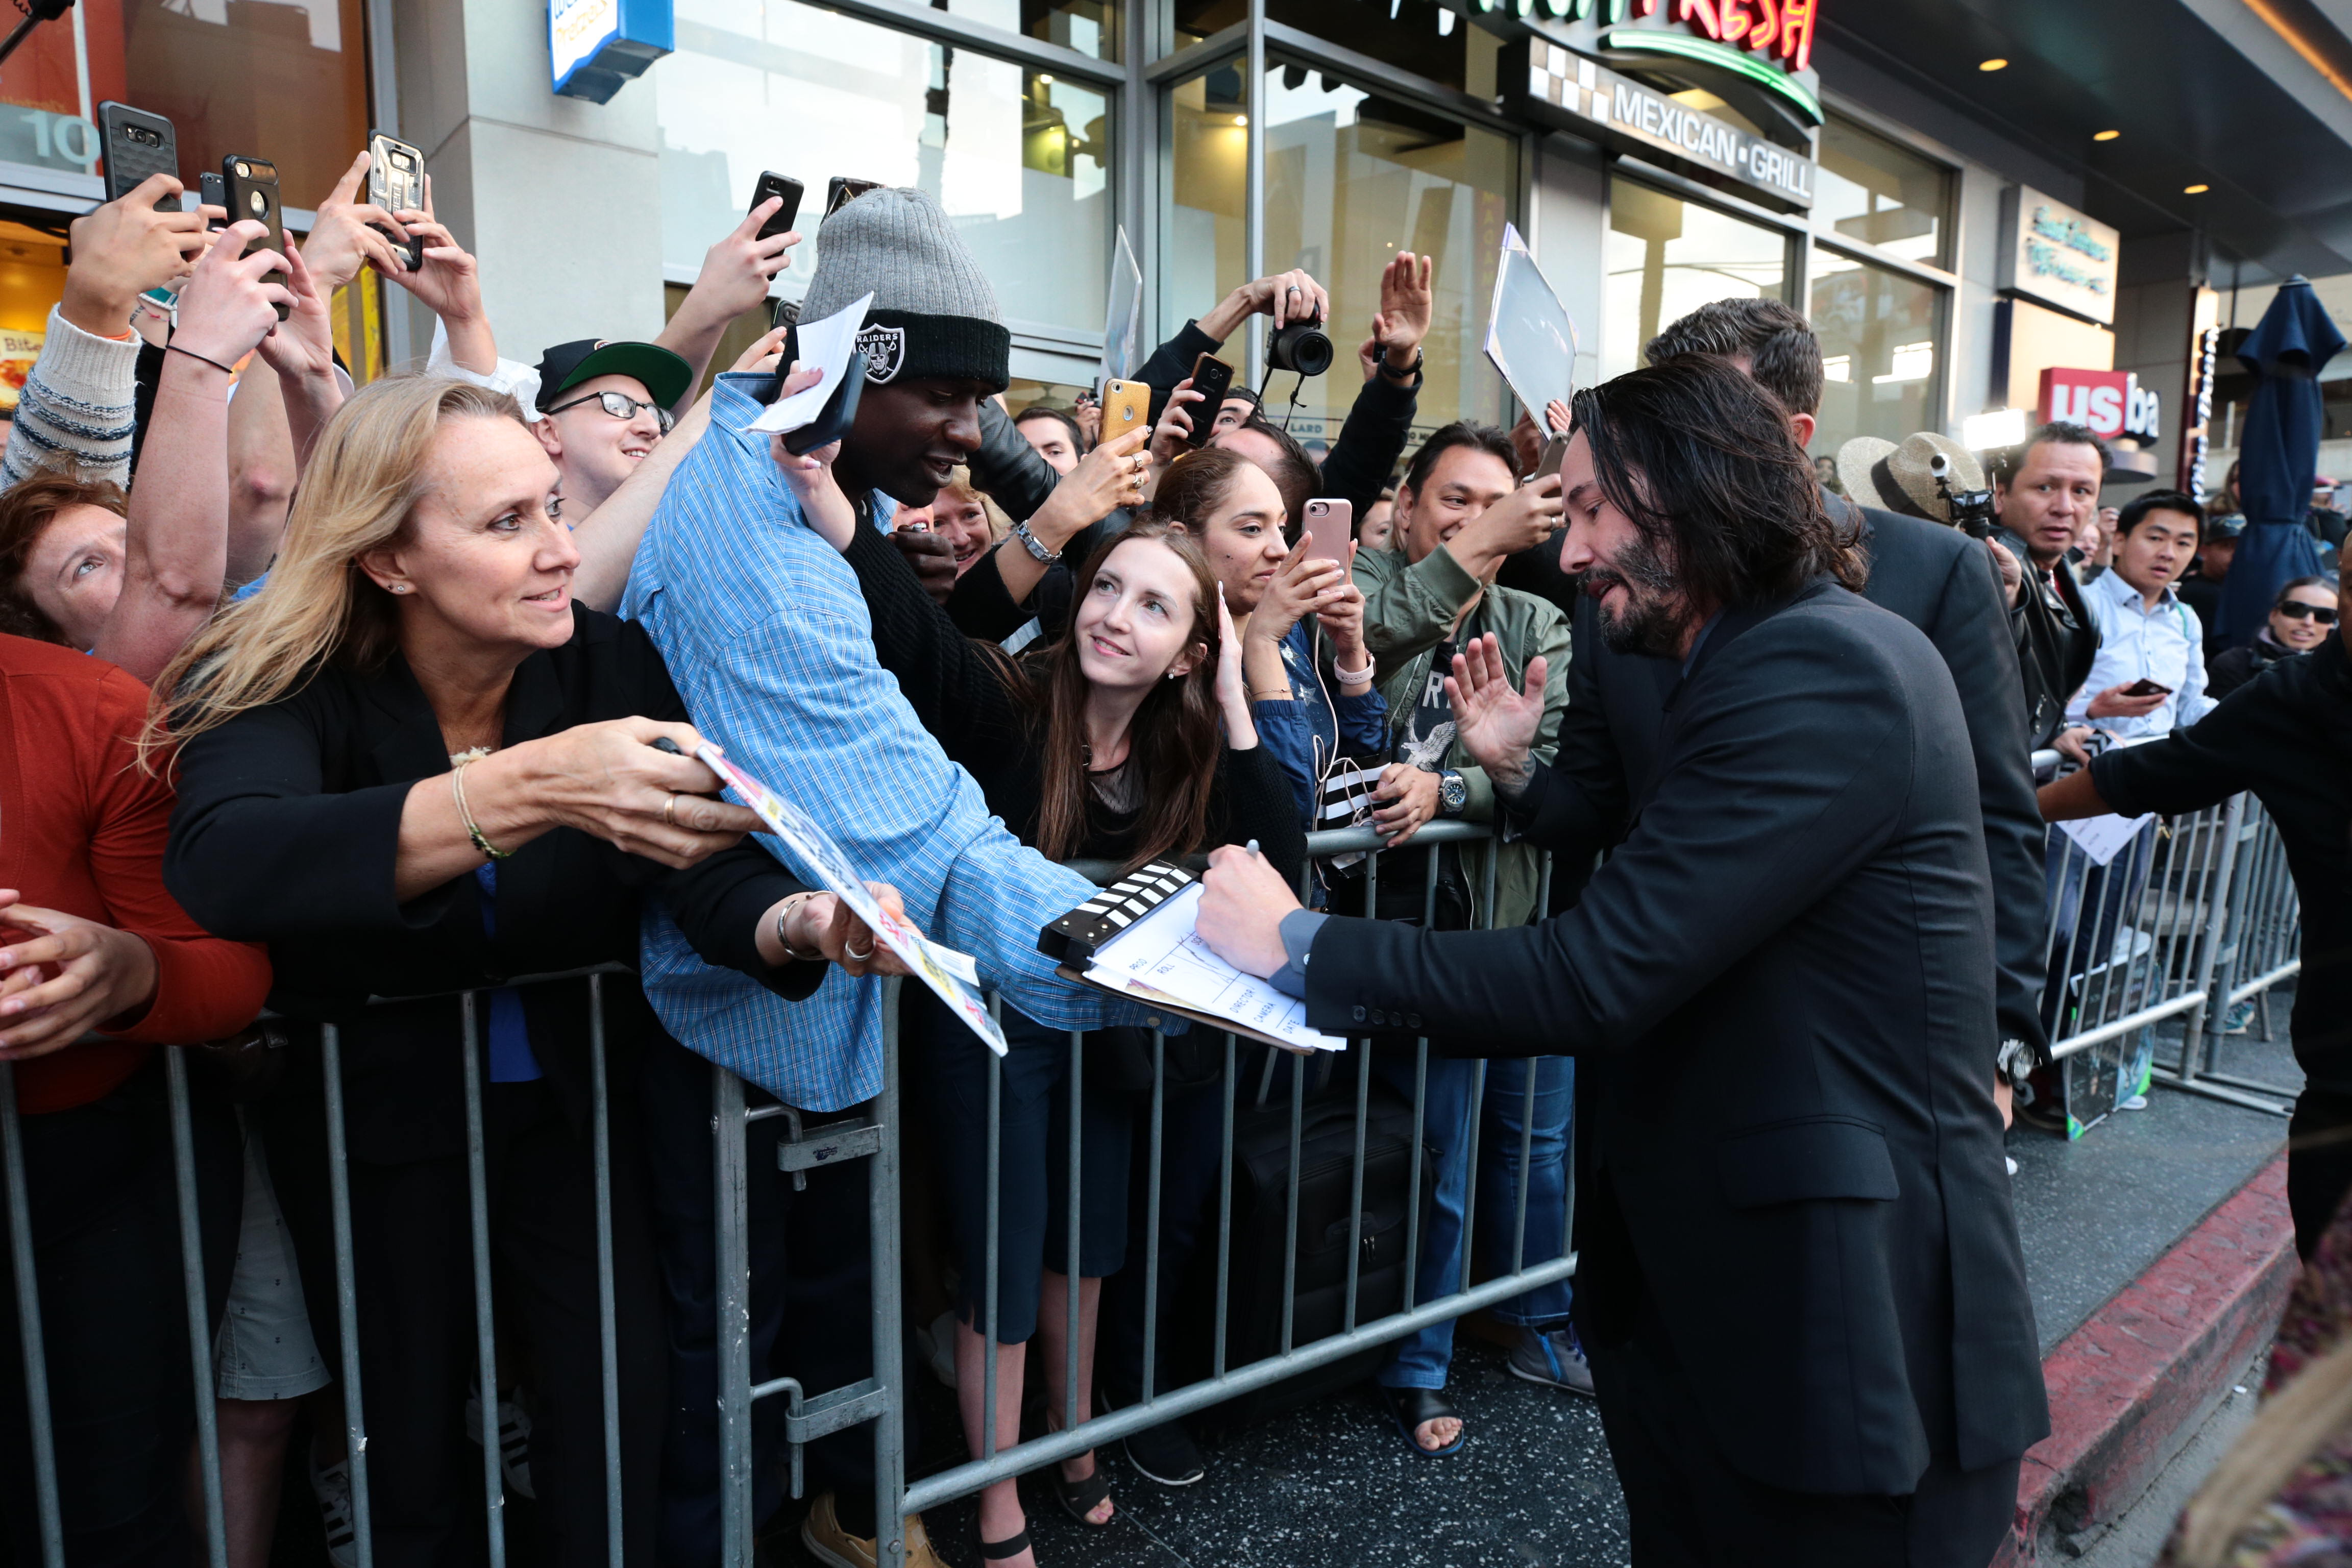 Keanu Reeves seen at Lionsgate presents the Special Screening of 'John Wick: Chapter 3 - Parabellum' at TCL Chinese Theatre, in Los Angeles, California, on May 15, 2019. | Source: Getty Images